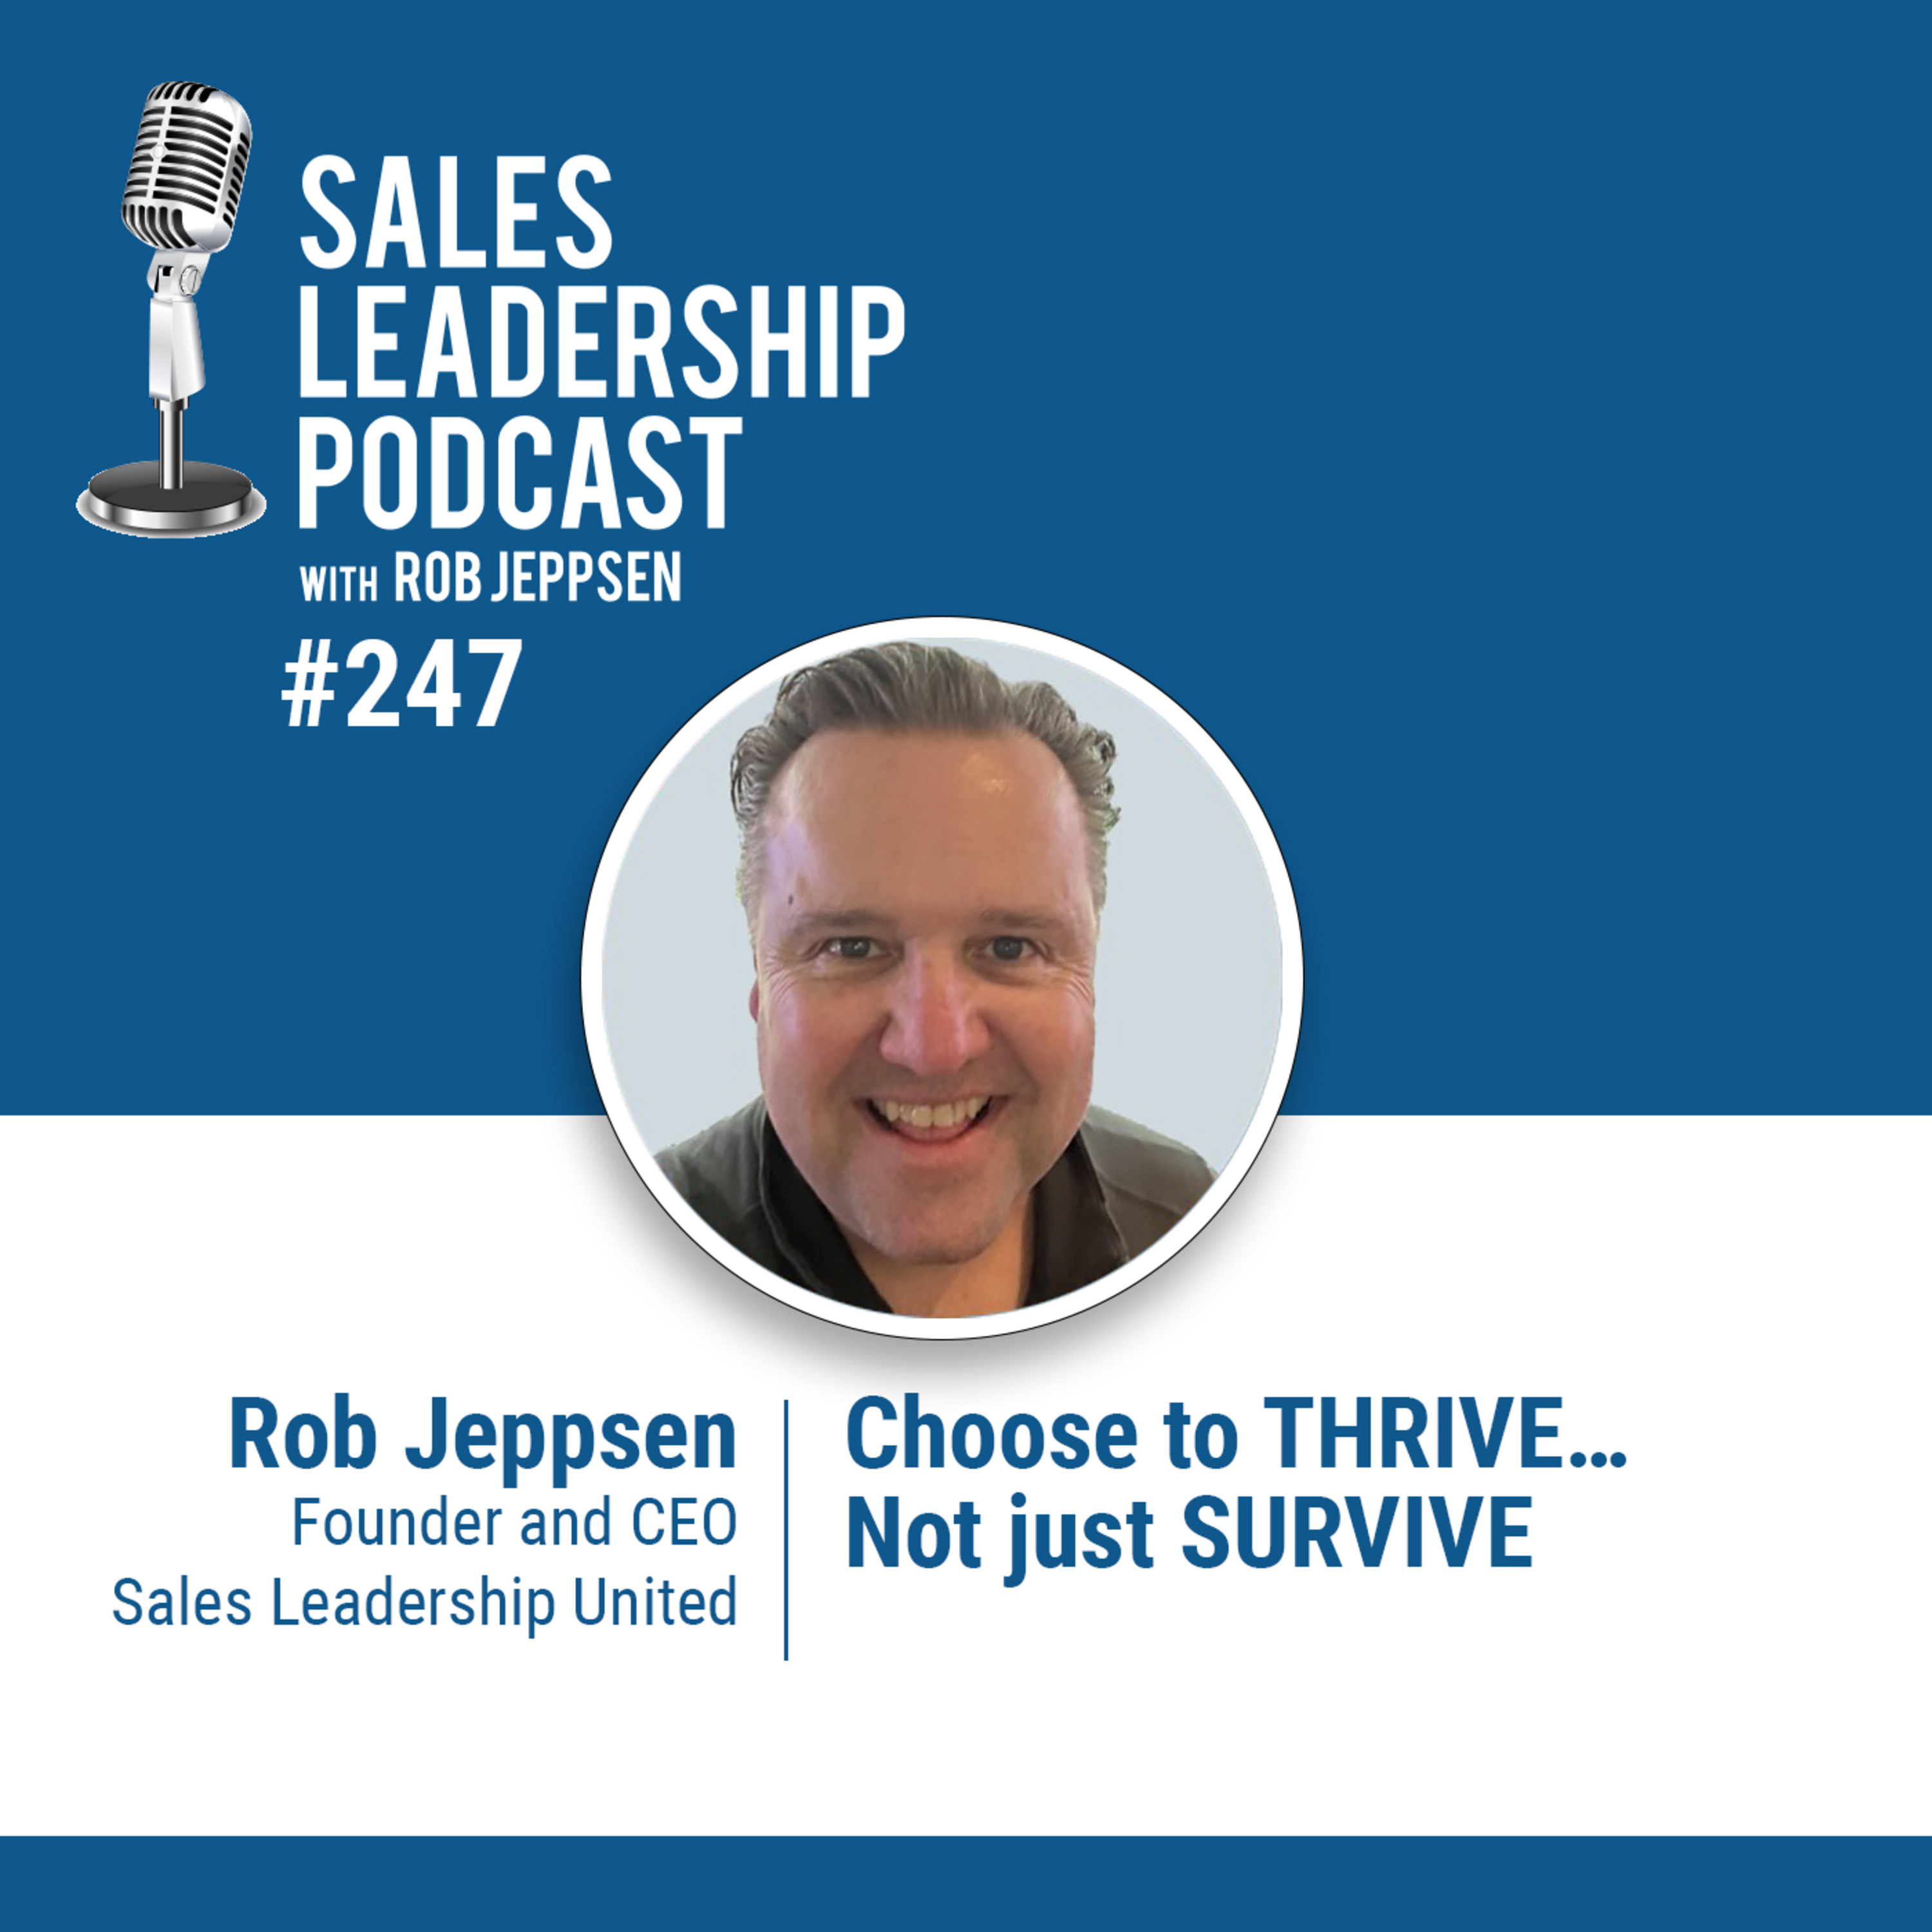 Episode 247: Rob Jeppsen of Sales Leadership United: Choose to THRIVE…Not just SURVIVE